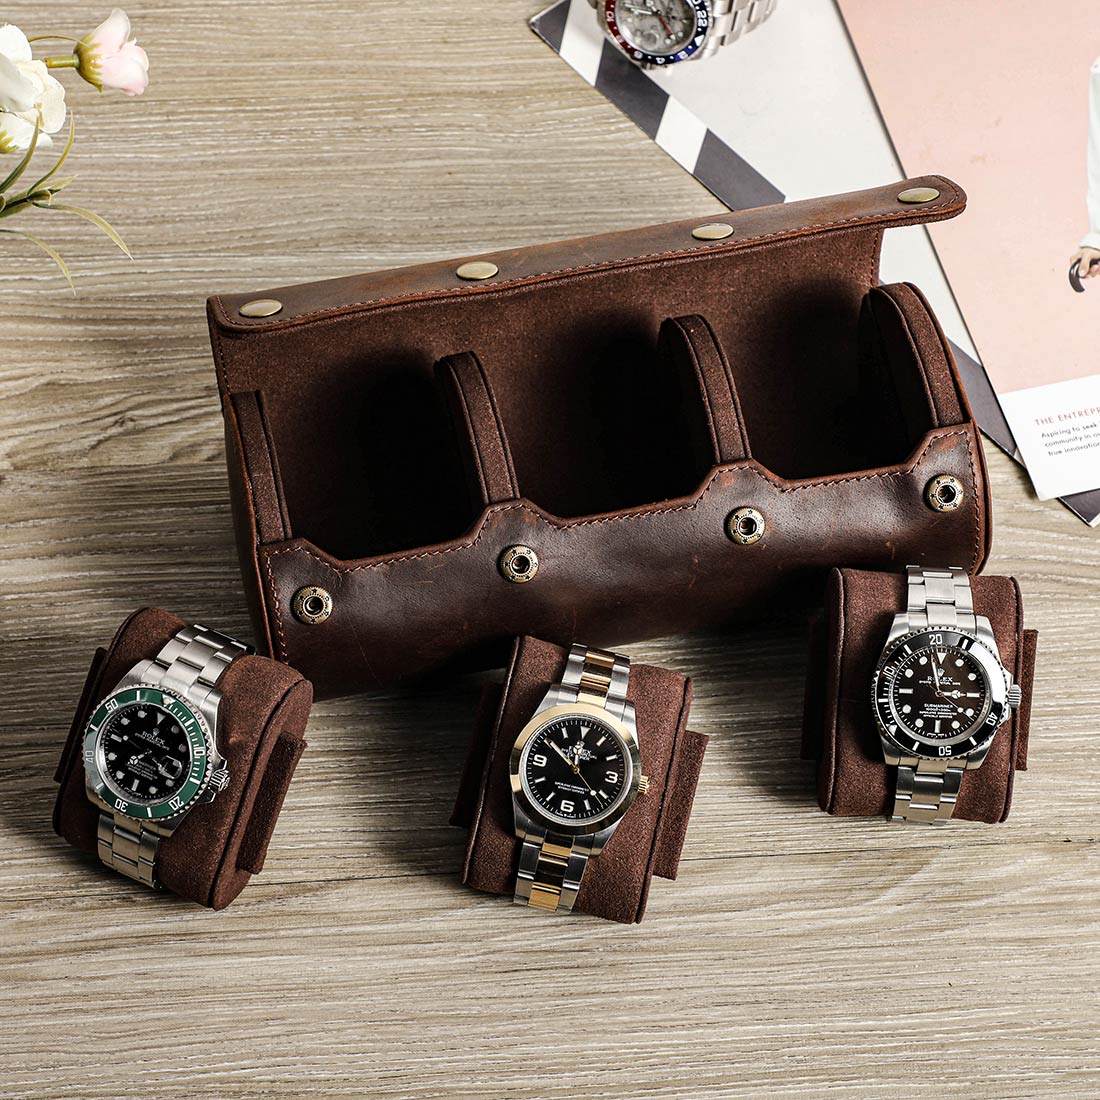 CONTACTS FAMILY Luxury Genuine Leather Watch Case 1/2/3/4 Slots Watch Roll Box For Rolex Case Holder Men Women Watches Display Organizer Gift